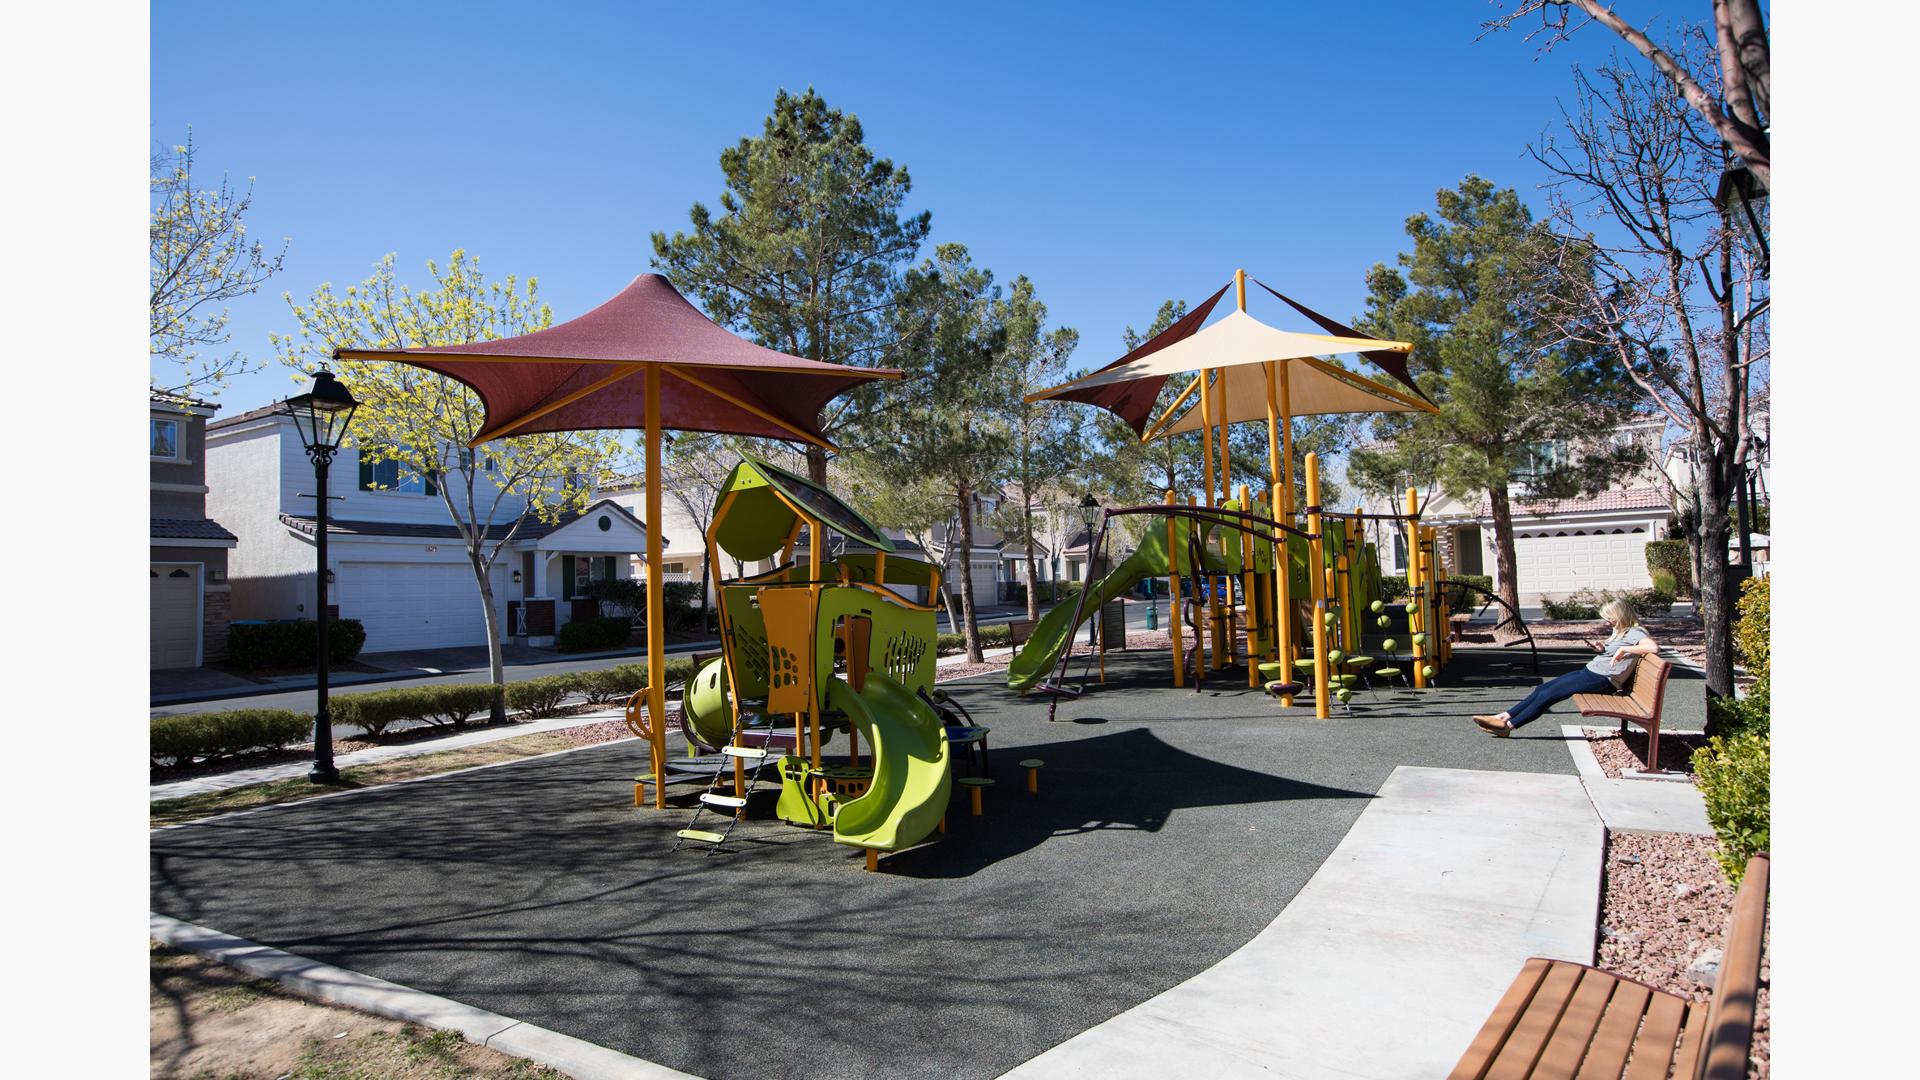 Lamplight Square at Coronado Ranch
Las Vegas, NV. The PlayBooster® playstructure for ages 5 to 12 includes playground slides and climbers, interactive play panels and spinners. Nearby, a Smart Play® play structure for ages 2 to 5. This  delivers 16 different play activities ranging from musical panels, crawl tunnels and slides. All is covered by CoolToppers® shade structures.